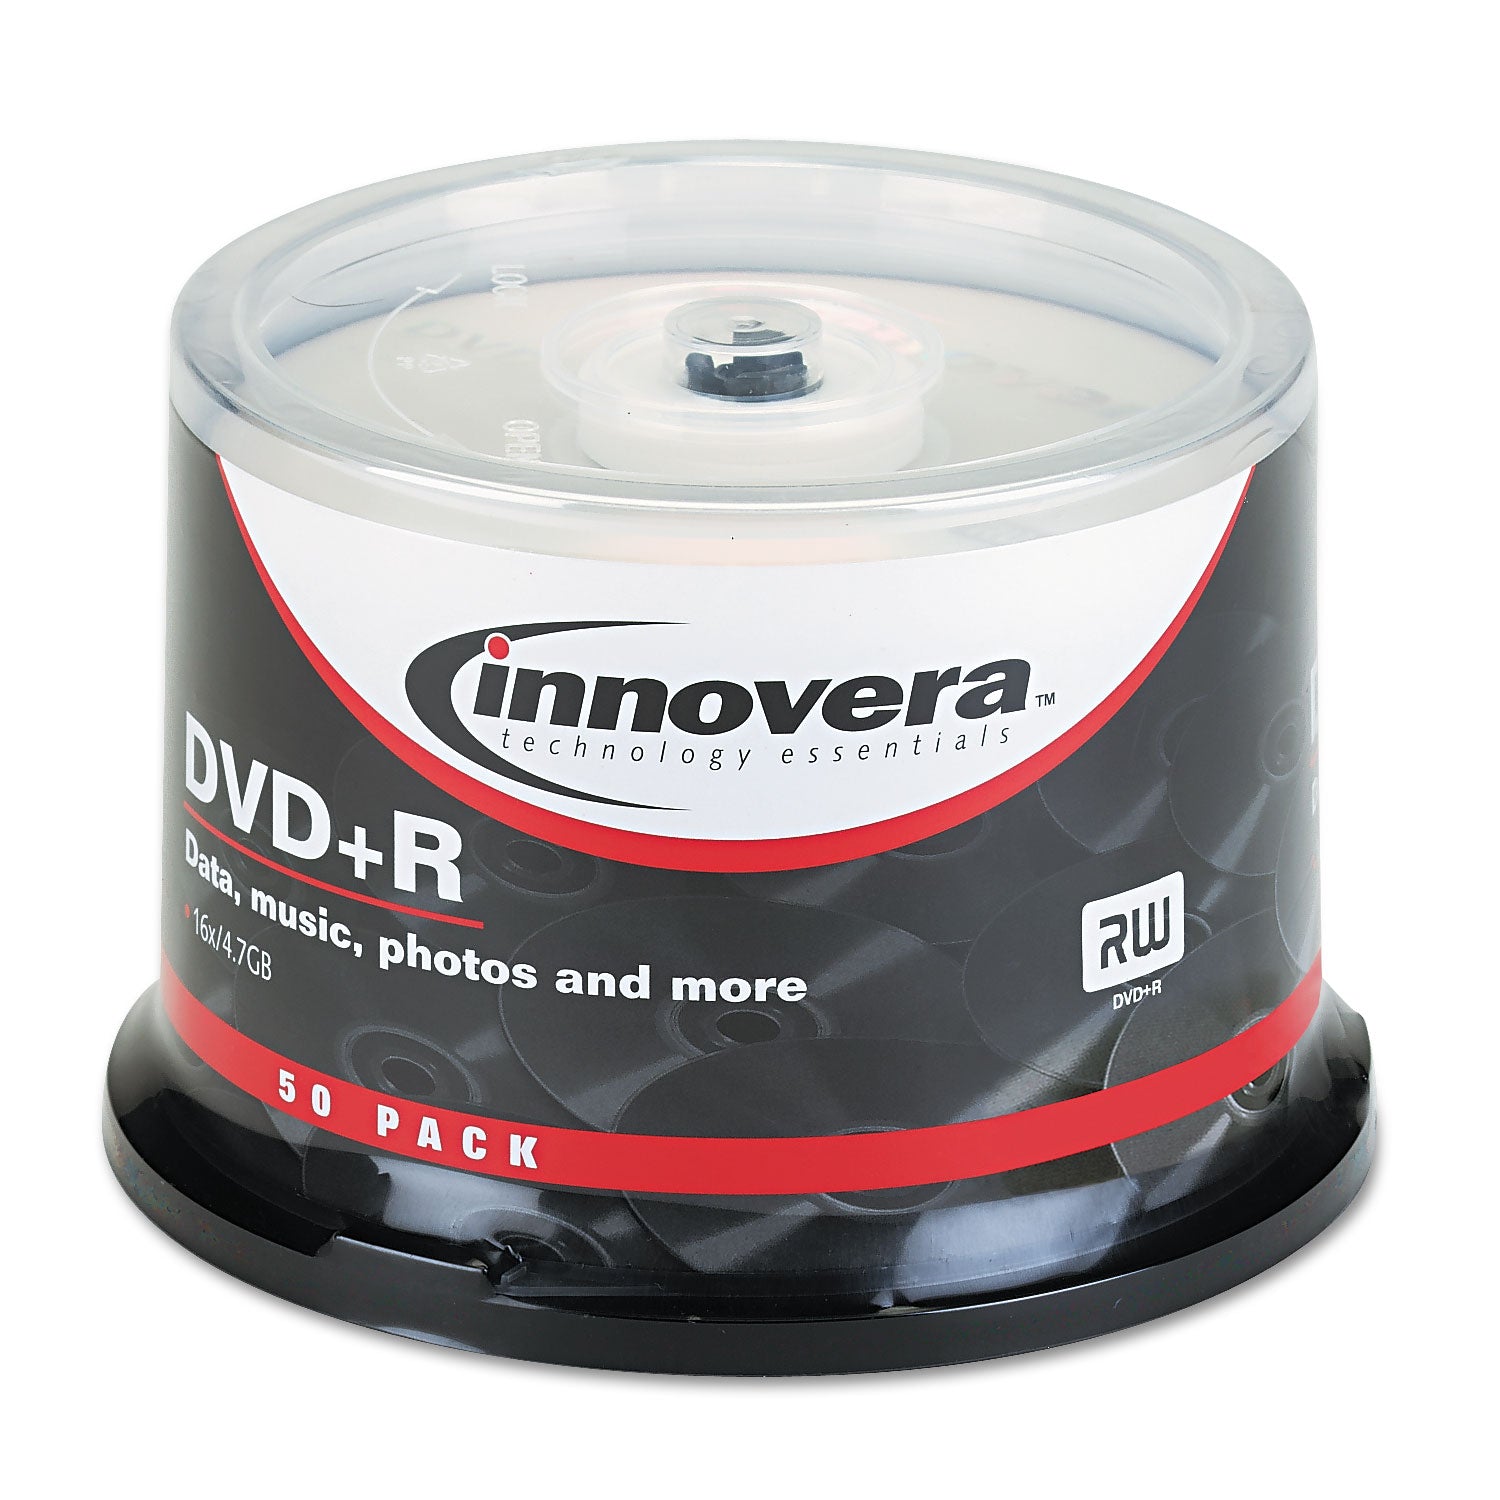 DVD+R Recordable Disc, 4.7 GB, 16x, Spindle, Silver, 50/Pack - 